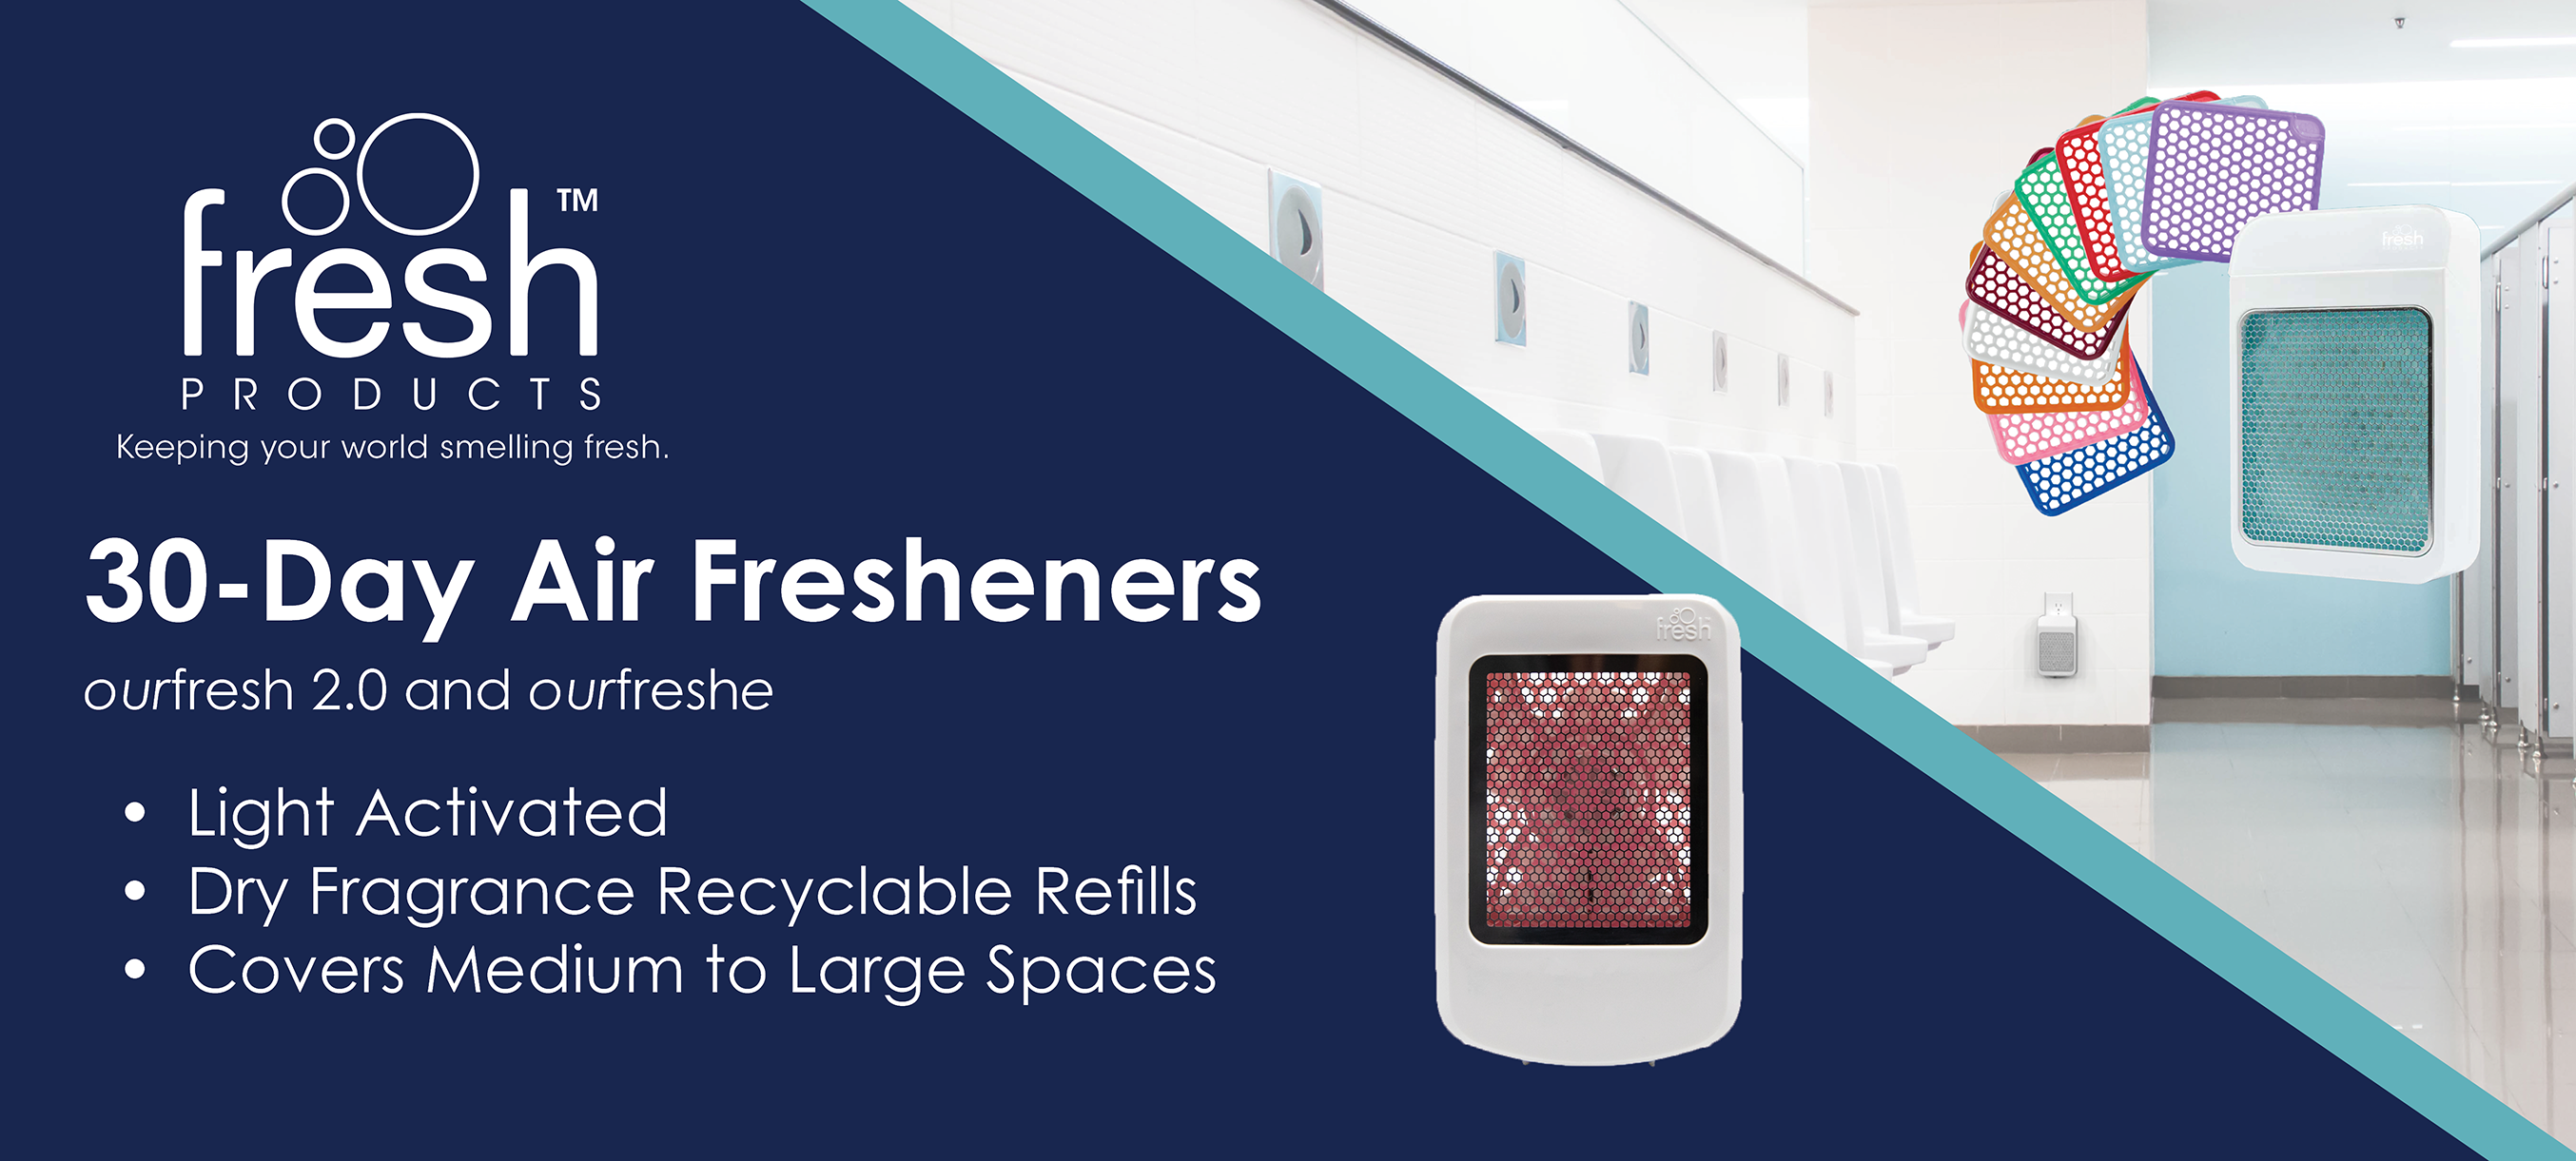 Fresh Products ourfresh 2.0 and ourfreshe 30-day air fresheners